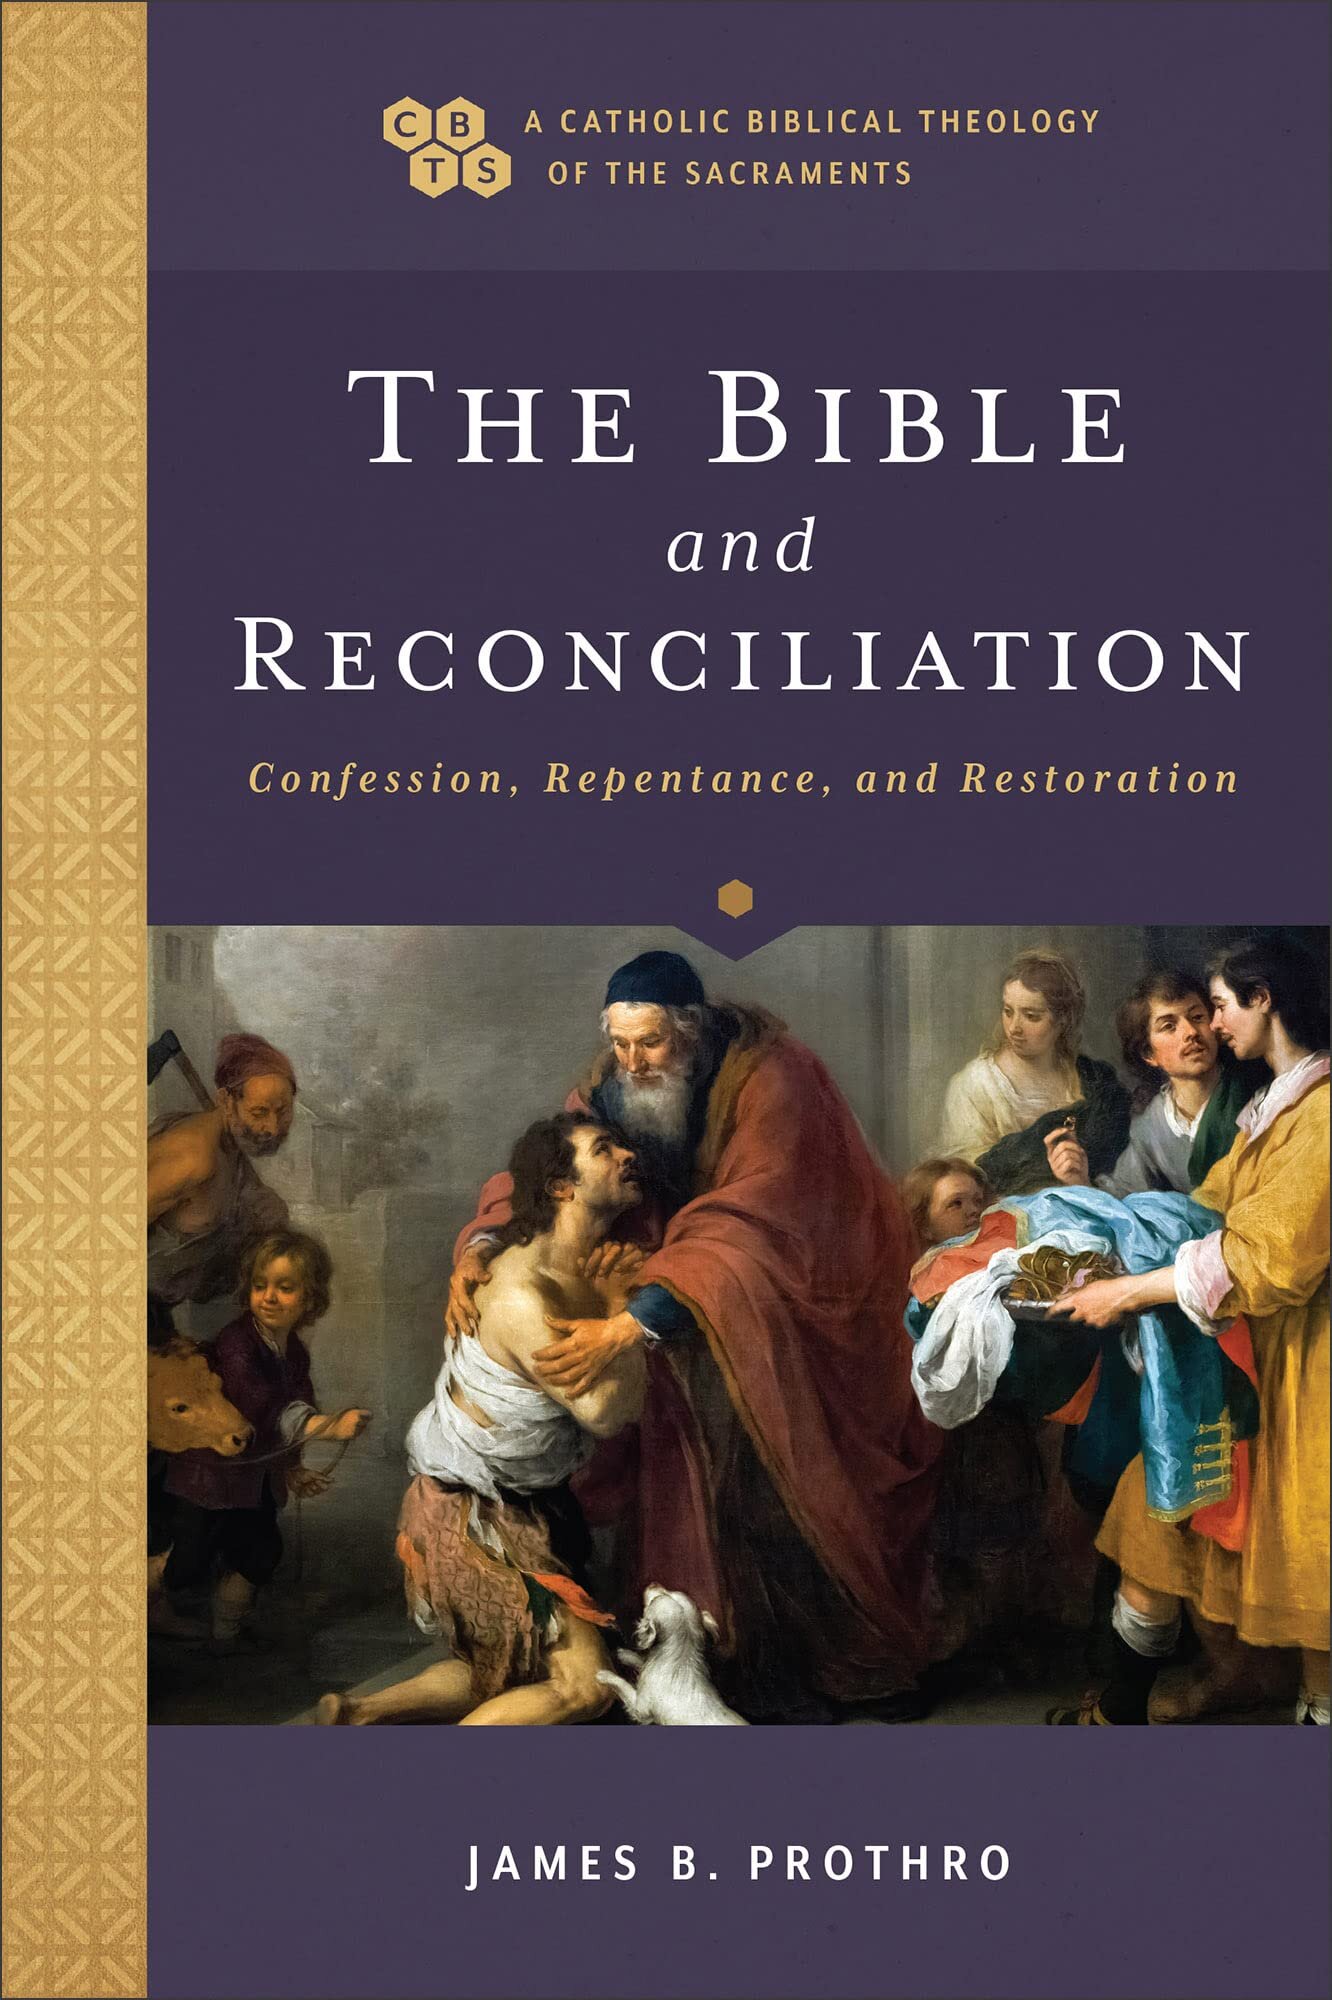 The Bible and Reconciliation: Confession, Repentance, and Restoration (A Catholic Biblical Theology of the Sacraments)